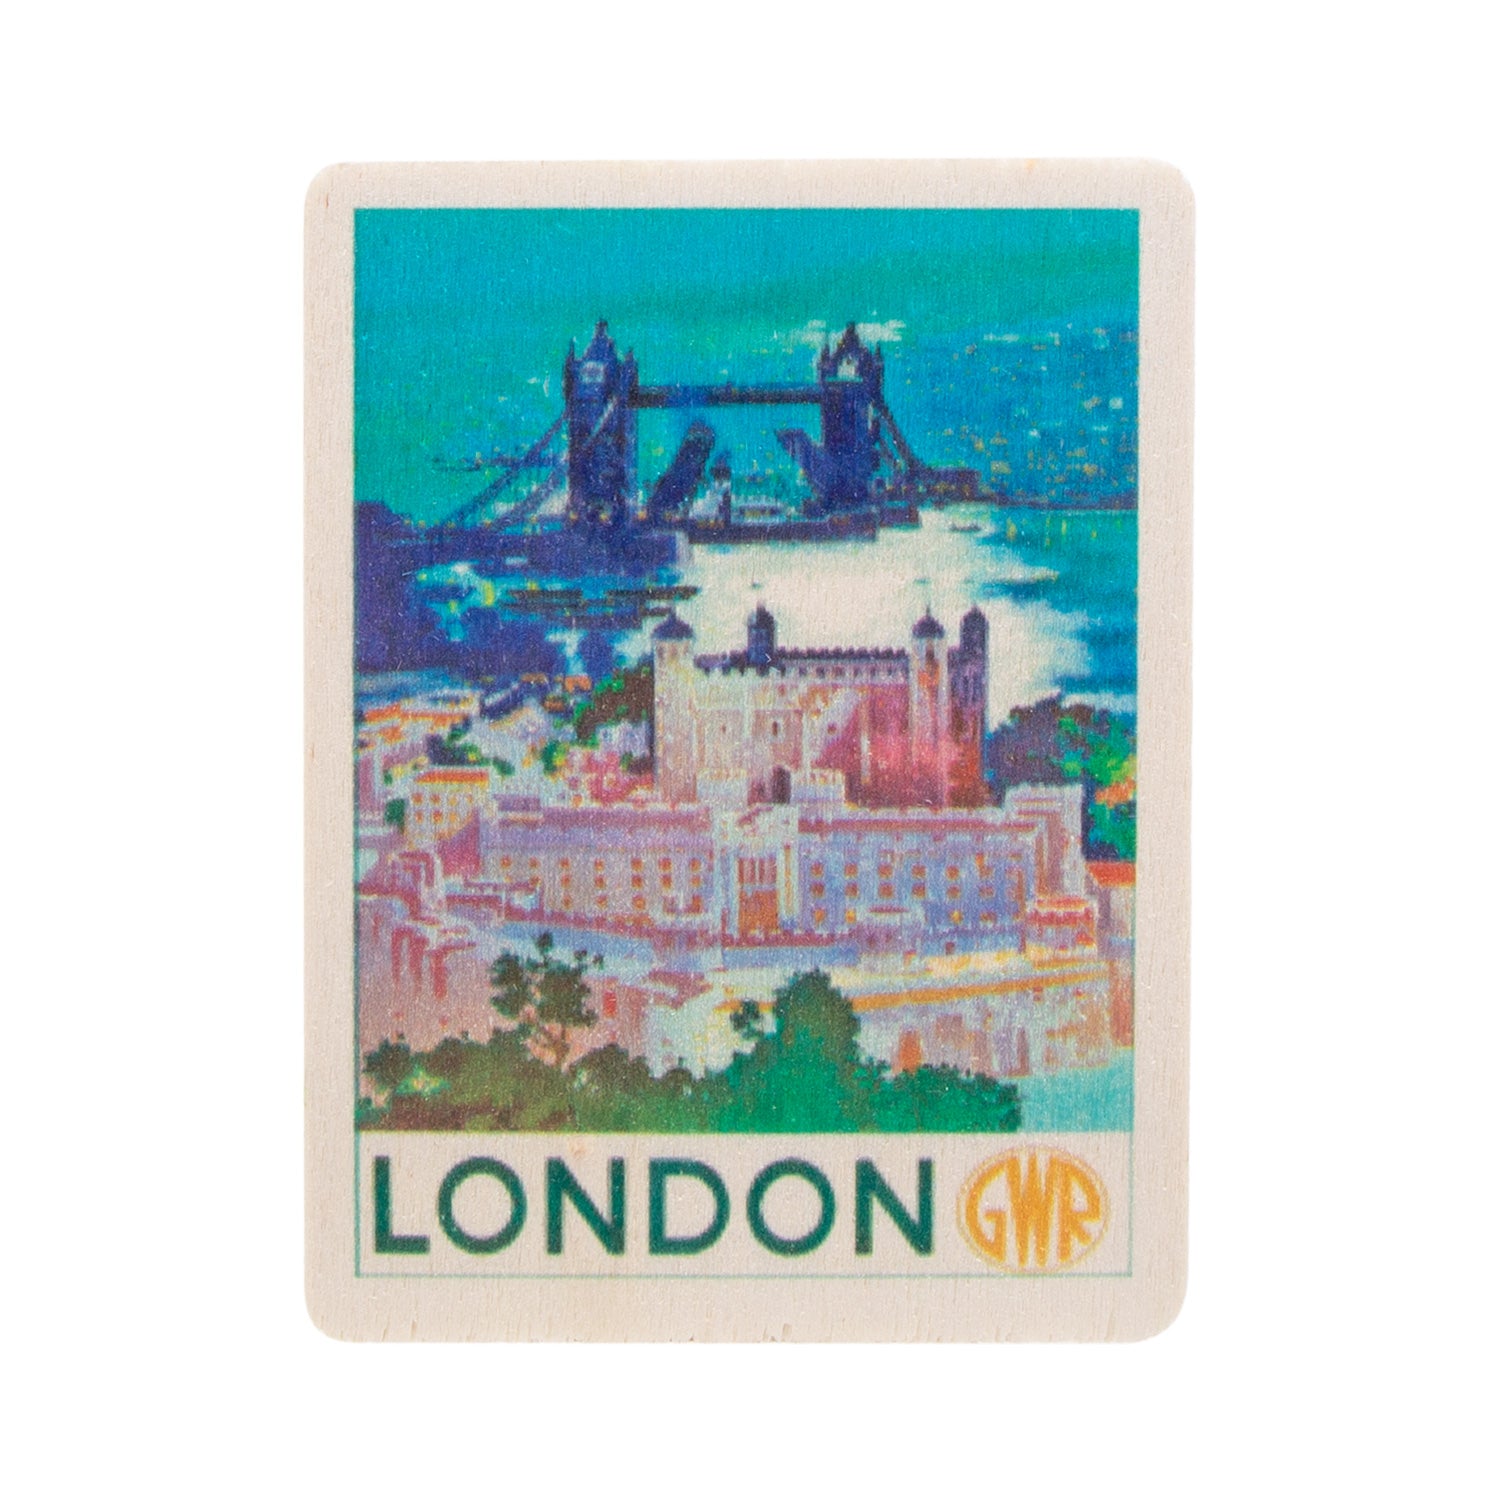 Wooden Magnet London GWR